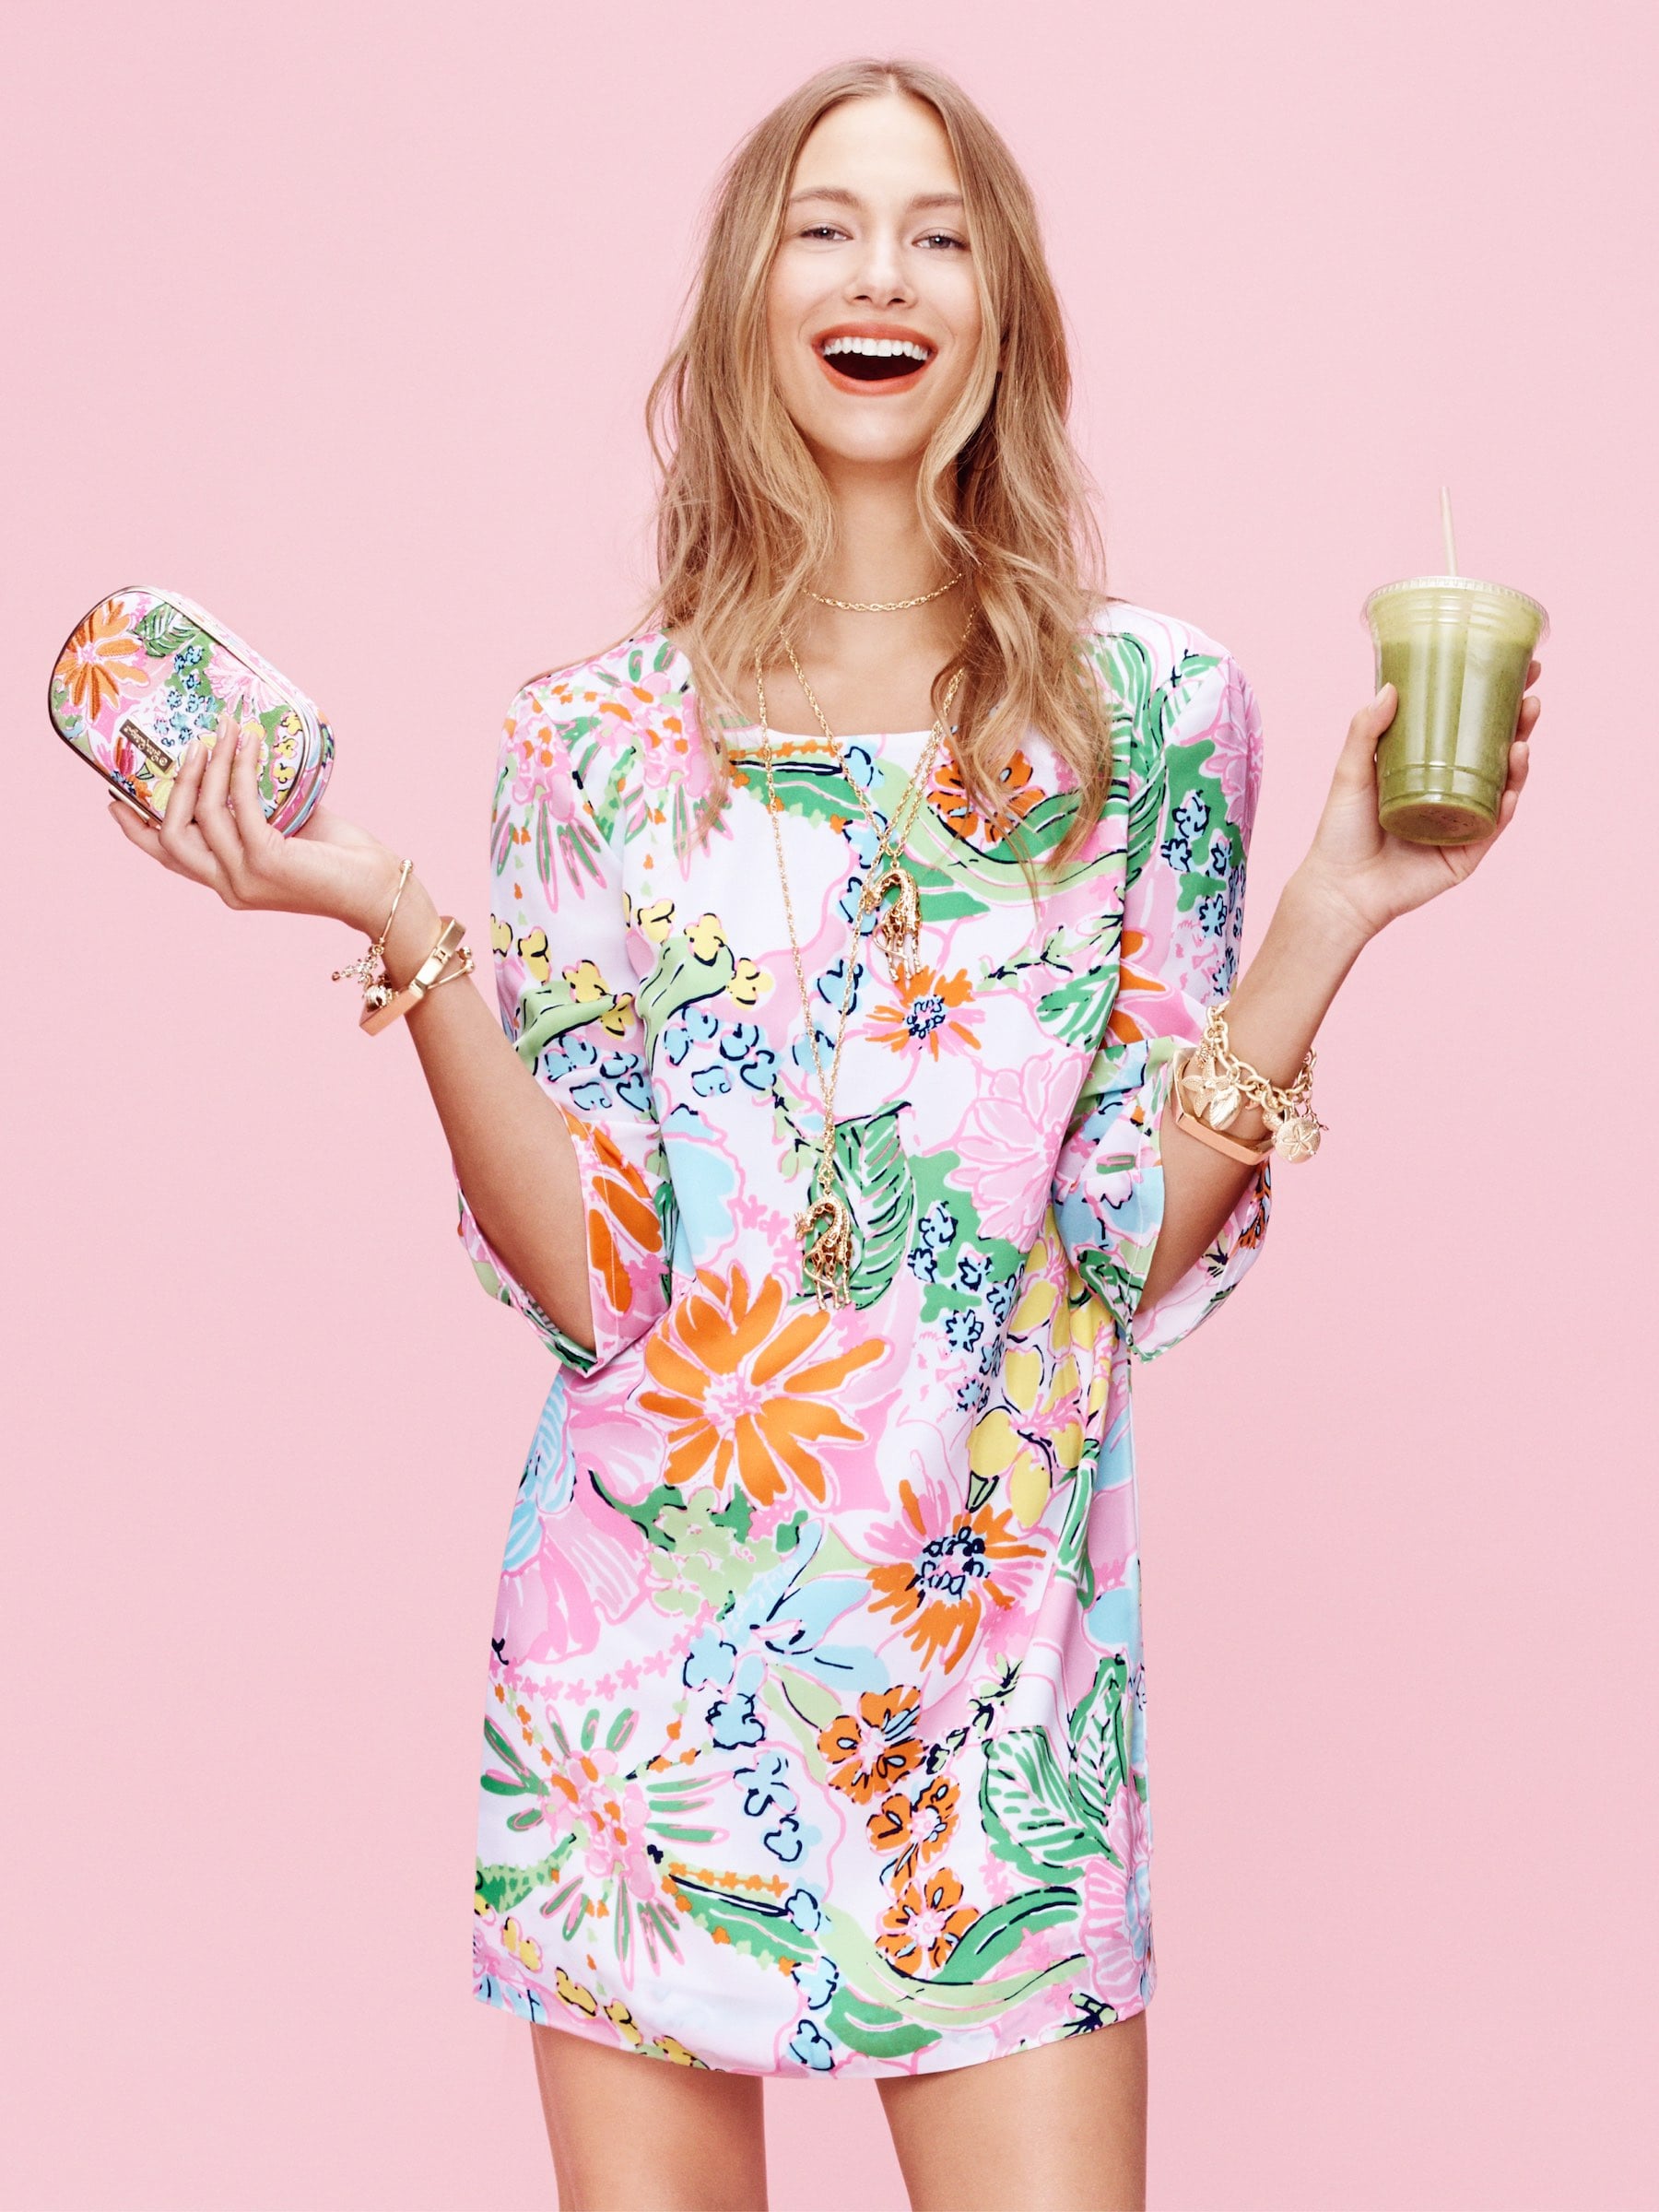 Target's Lilly Pulitzer collection is back for special anniversary — see  the looks!